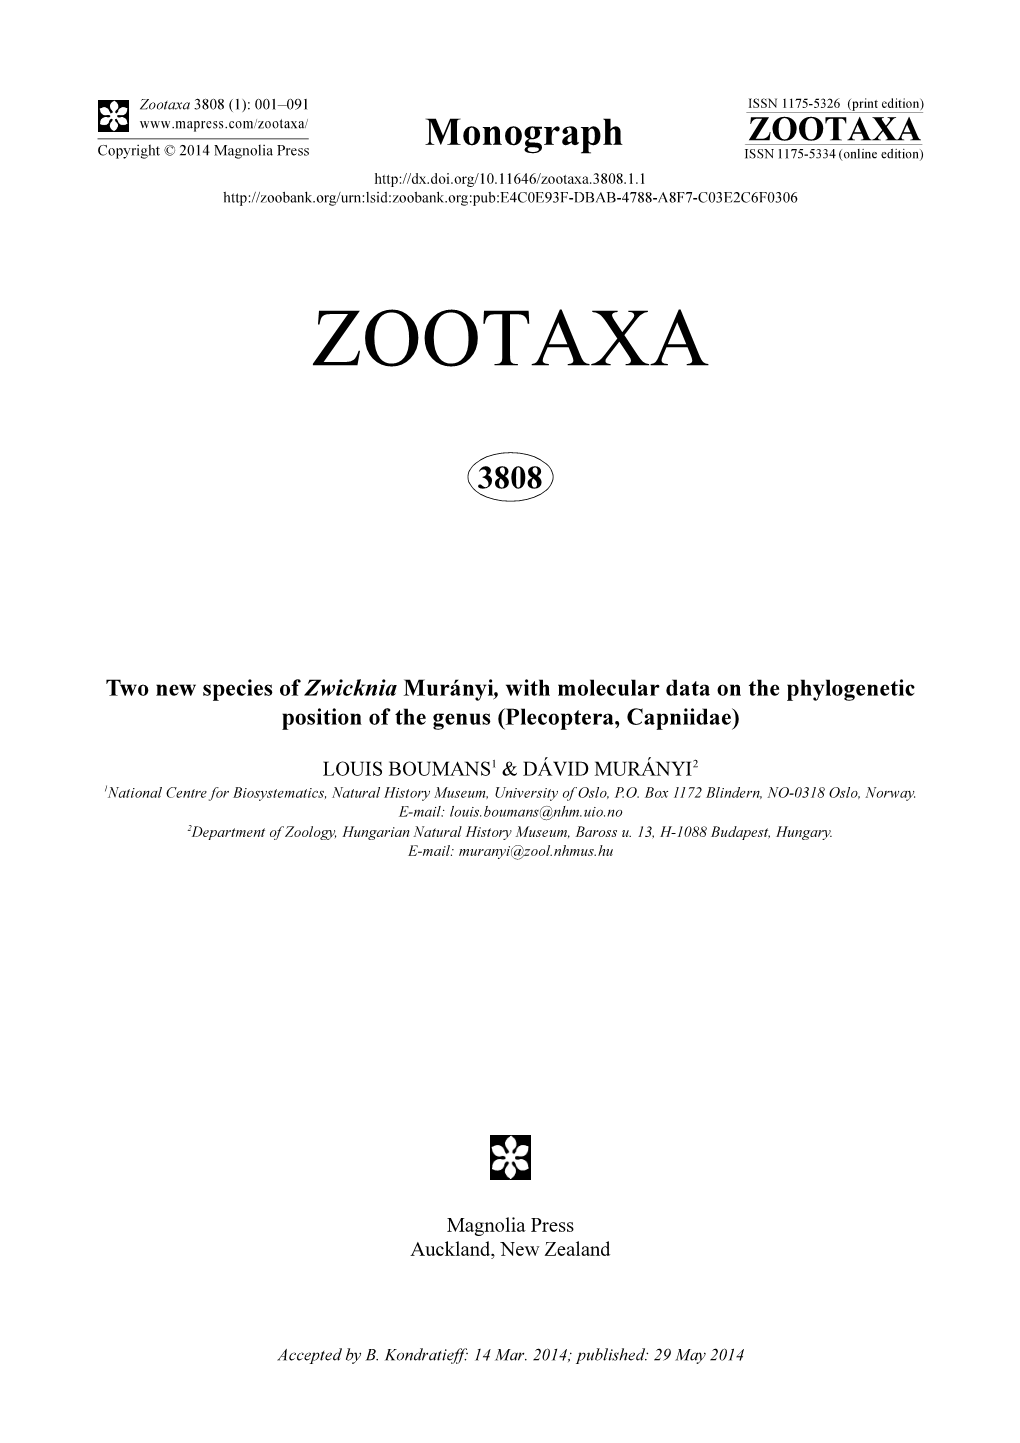 Two New Species of Zwicknia Murányi, with Molecular Data on the Phylogenetic Position of the Genus (Plecoptera, Capniidae)